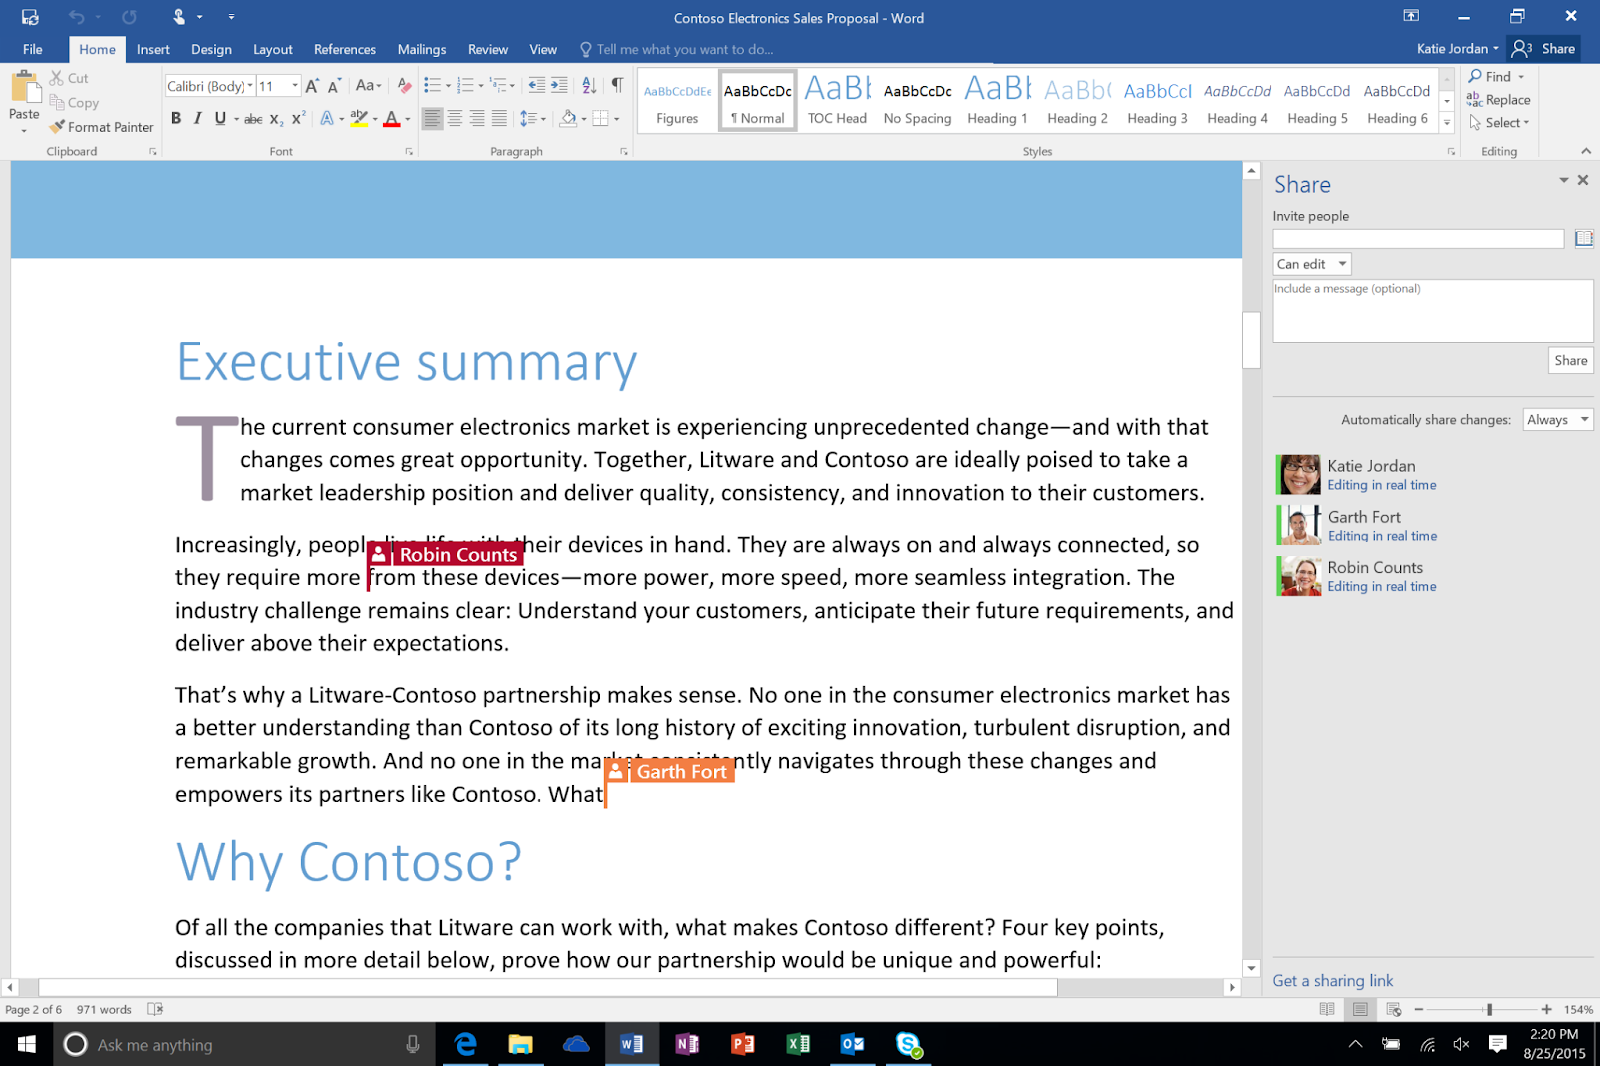 Collaboration usage in Microsoft Word